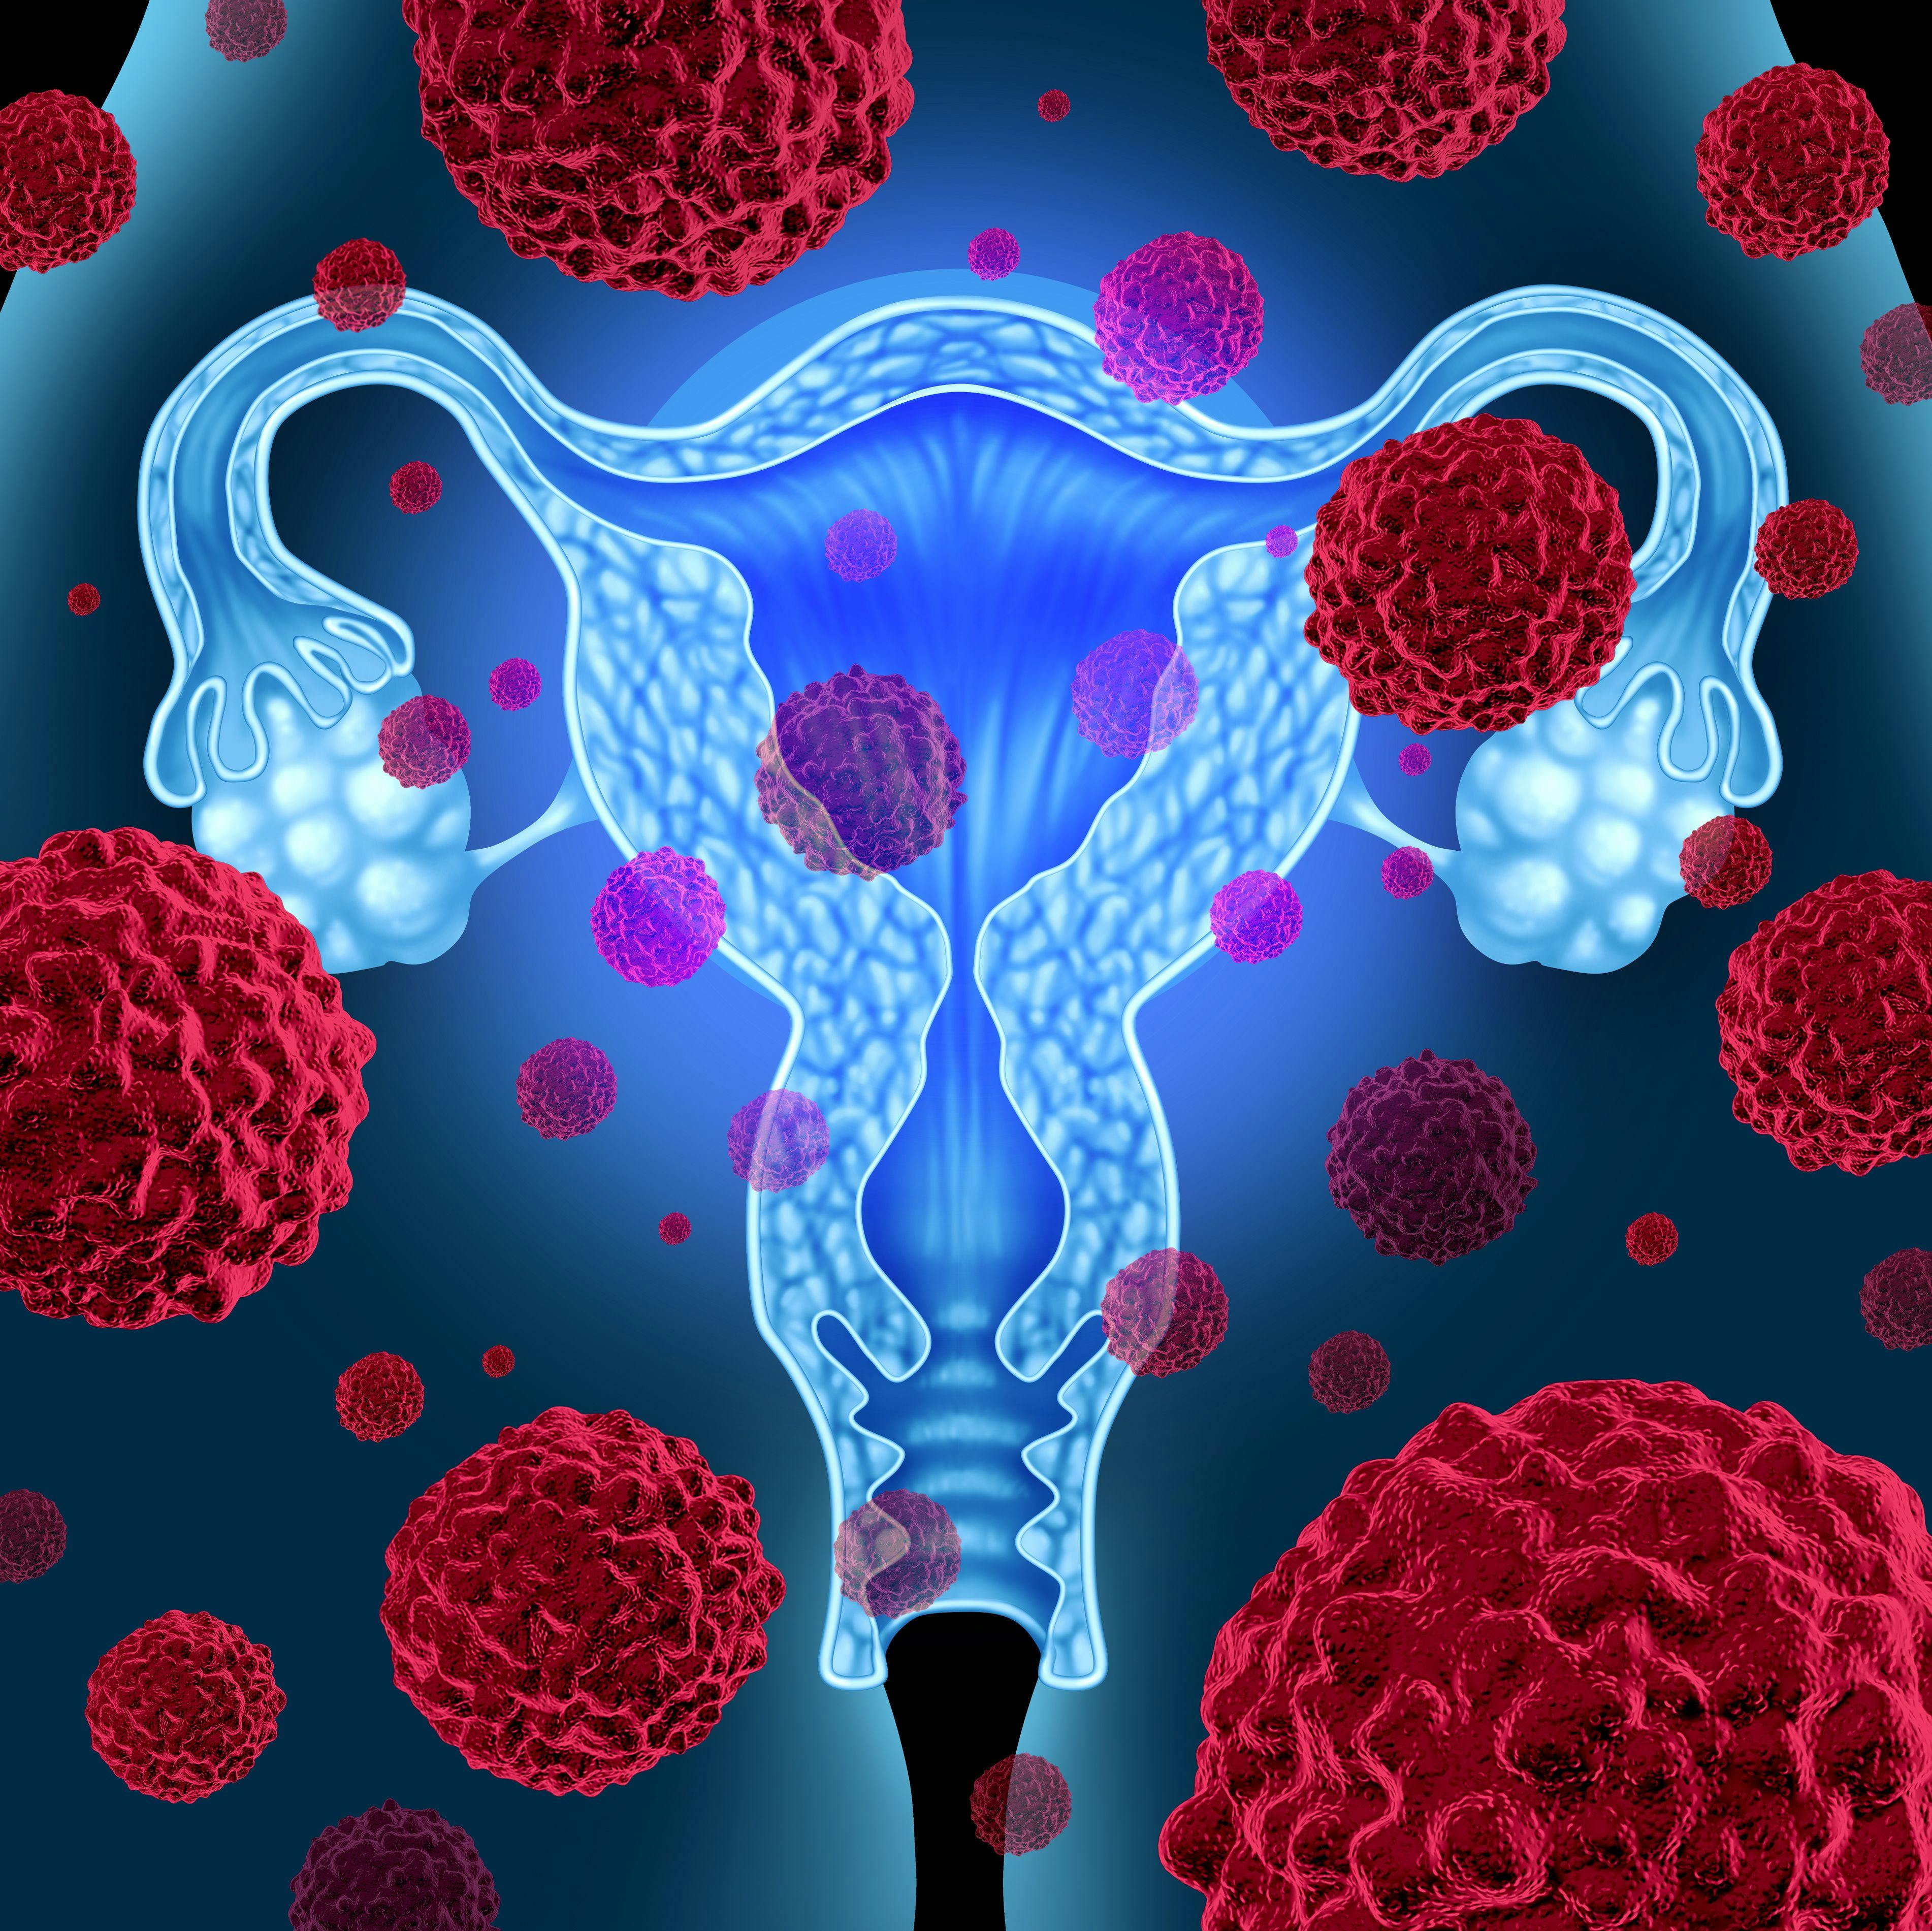 Niraparib Demonstrates PFS Benefit in Chinese Population With Advanced Ovarian Cancer